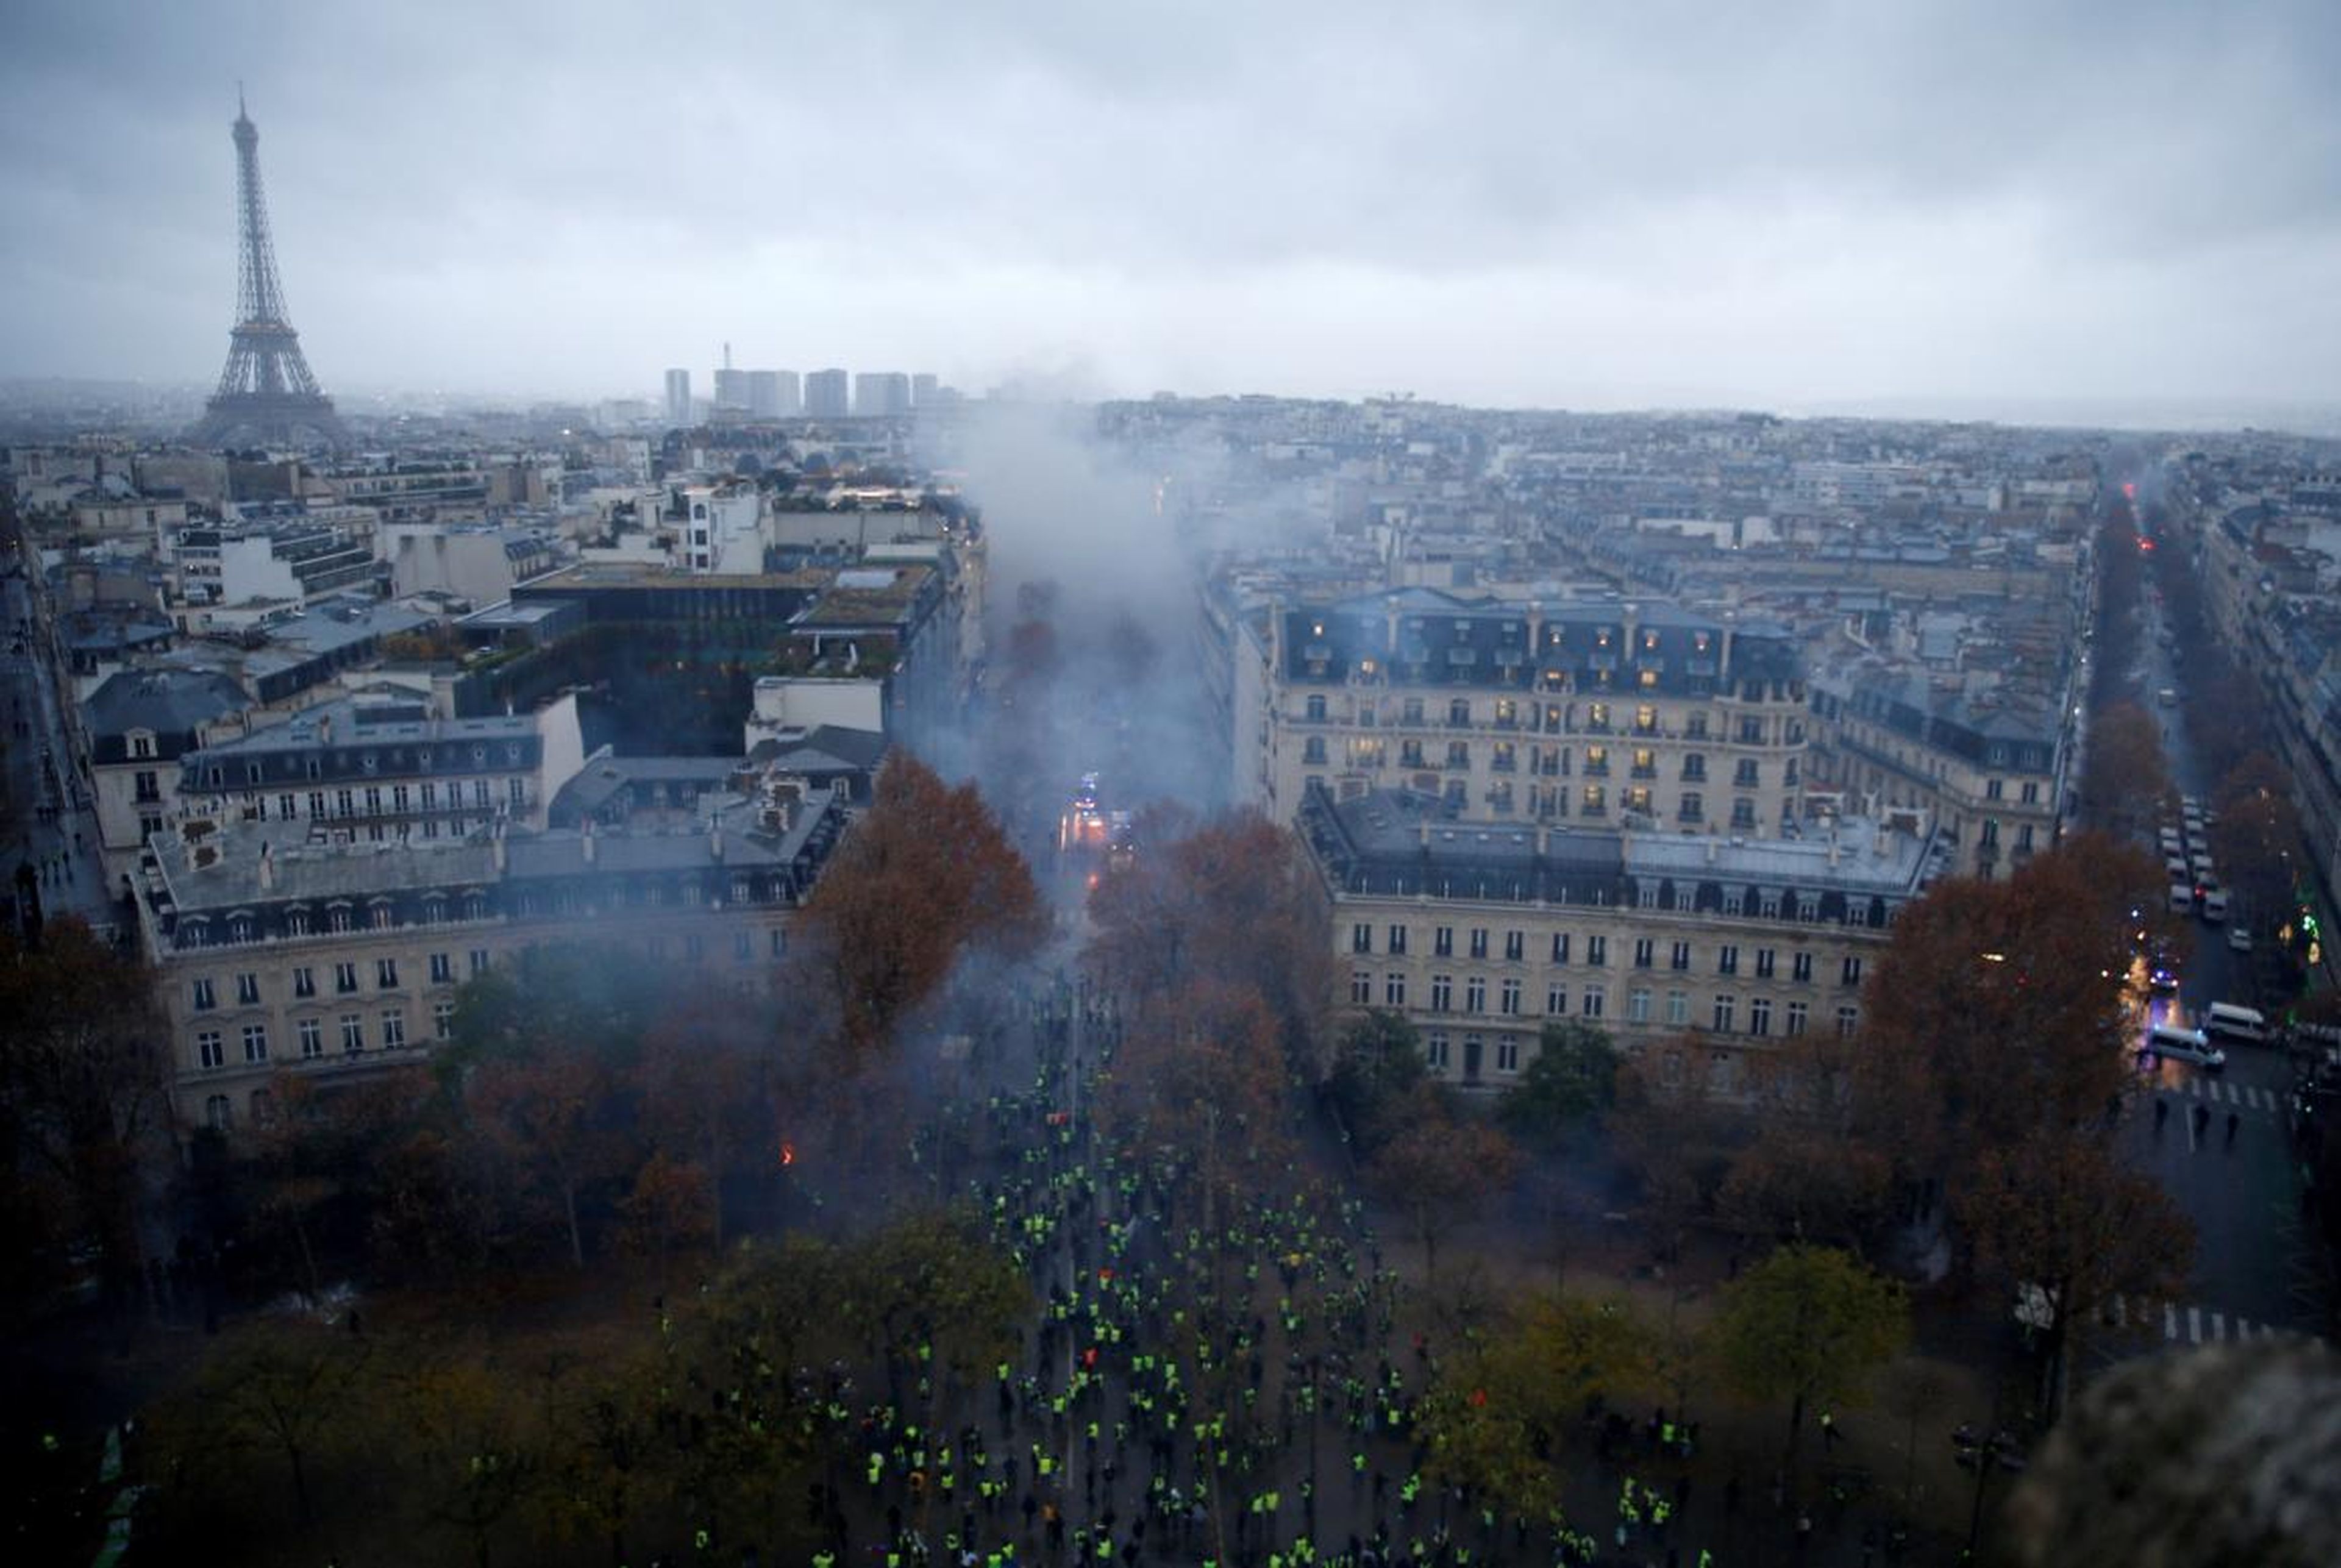 Saturday's protests took over central Paris. Here, demonstrators are pictured at the Place de l'Etoile.